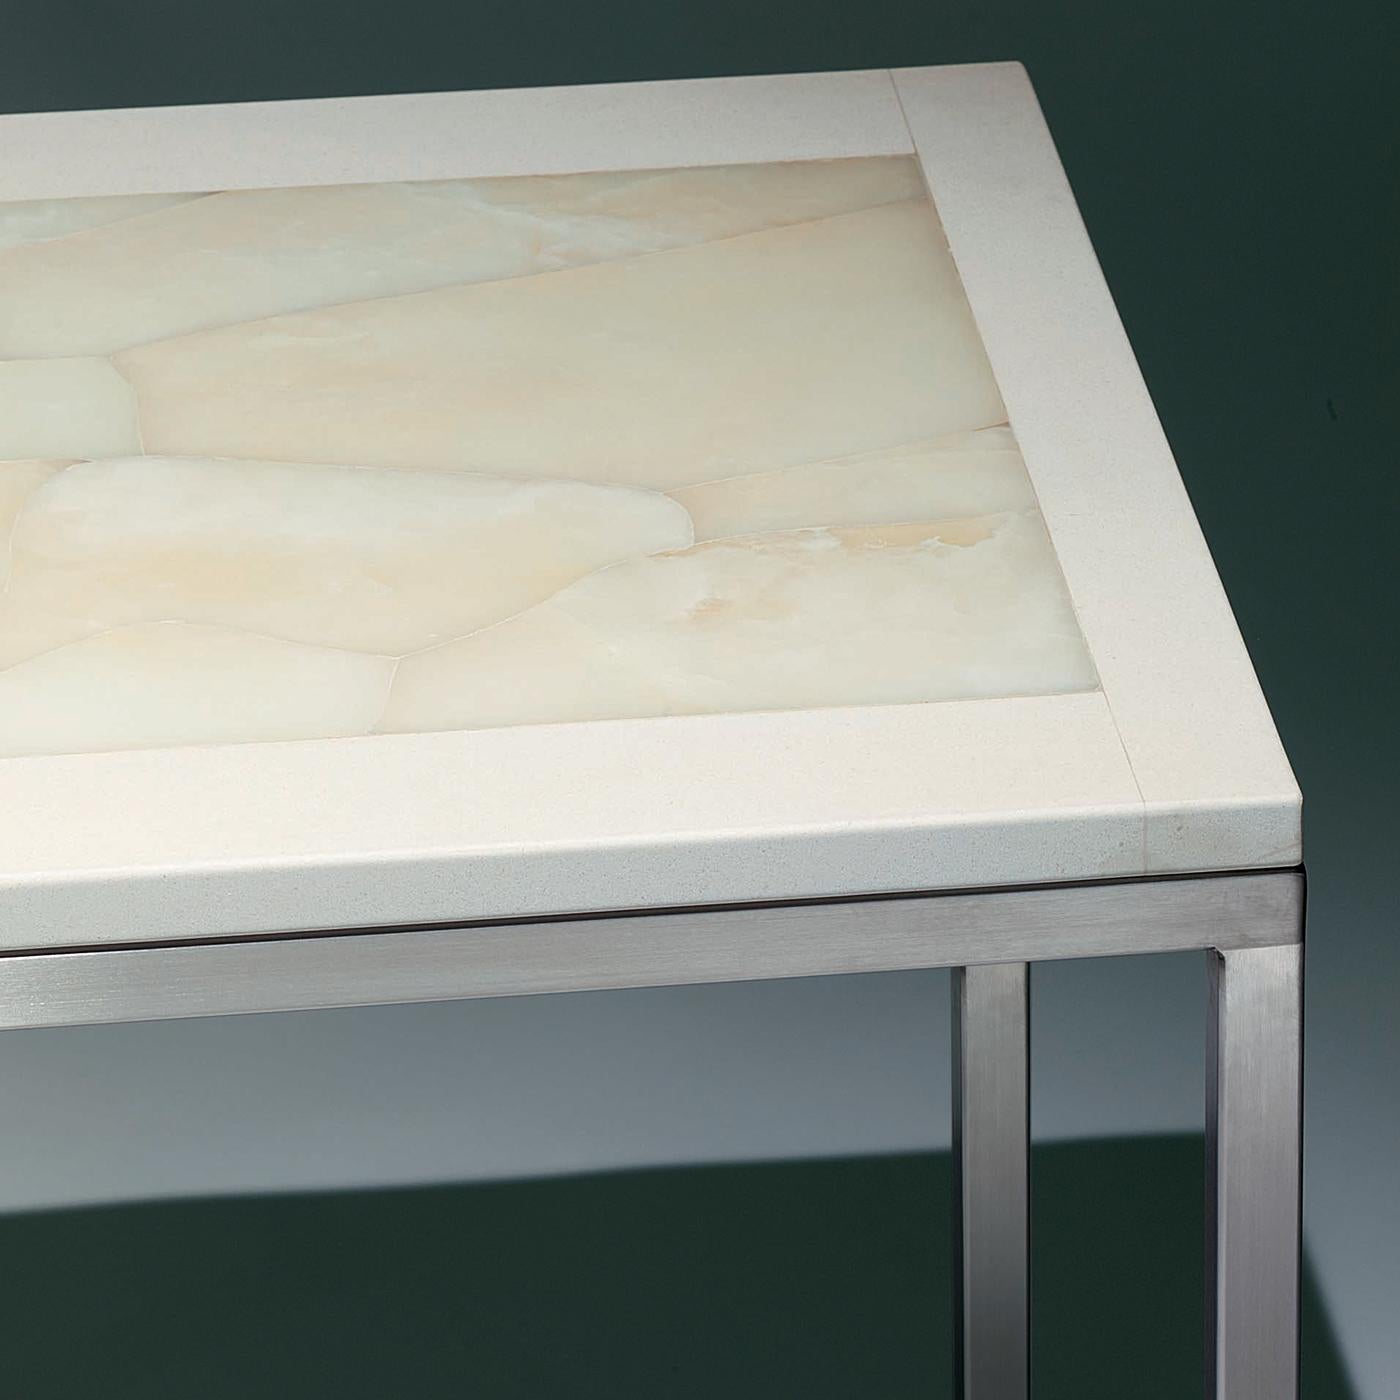 This large table will fit into any clean-styled, interior, including a dining room, living room, office, reception area or event venue. Its top is hand inlaid in white onyx trimmed in ivory-colored limestone. Its matte, smooth surface stands in